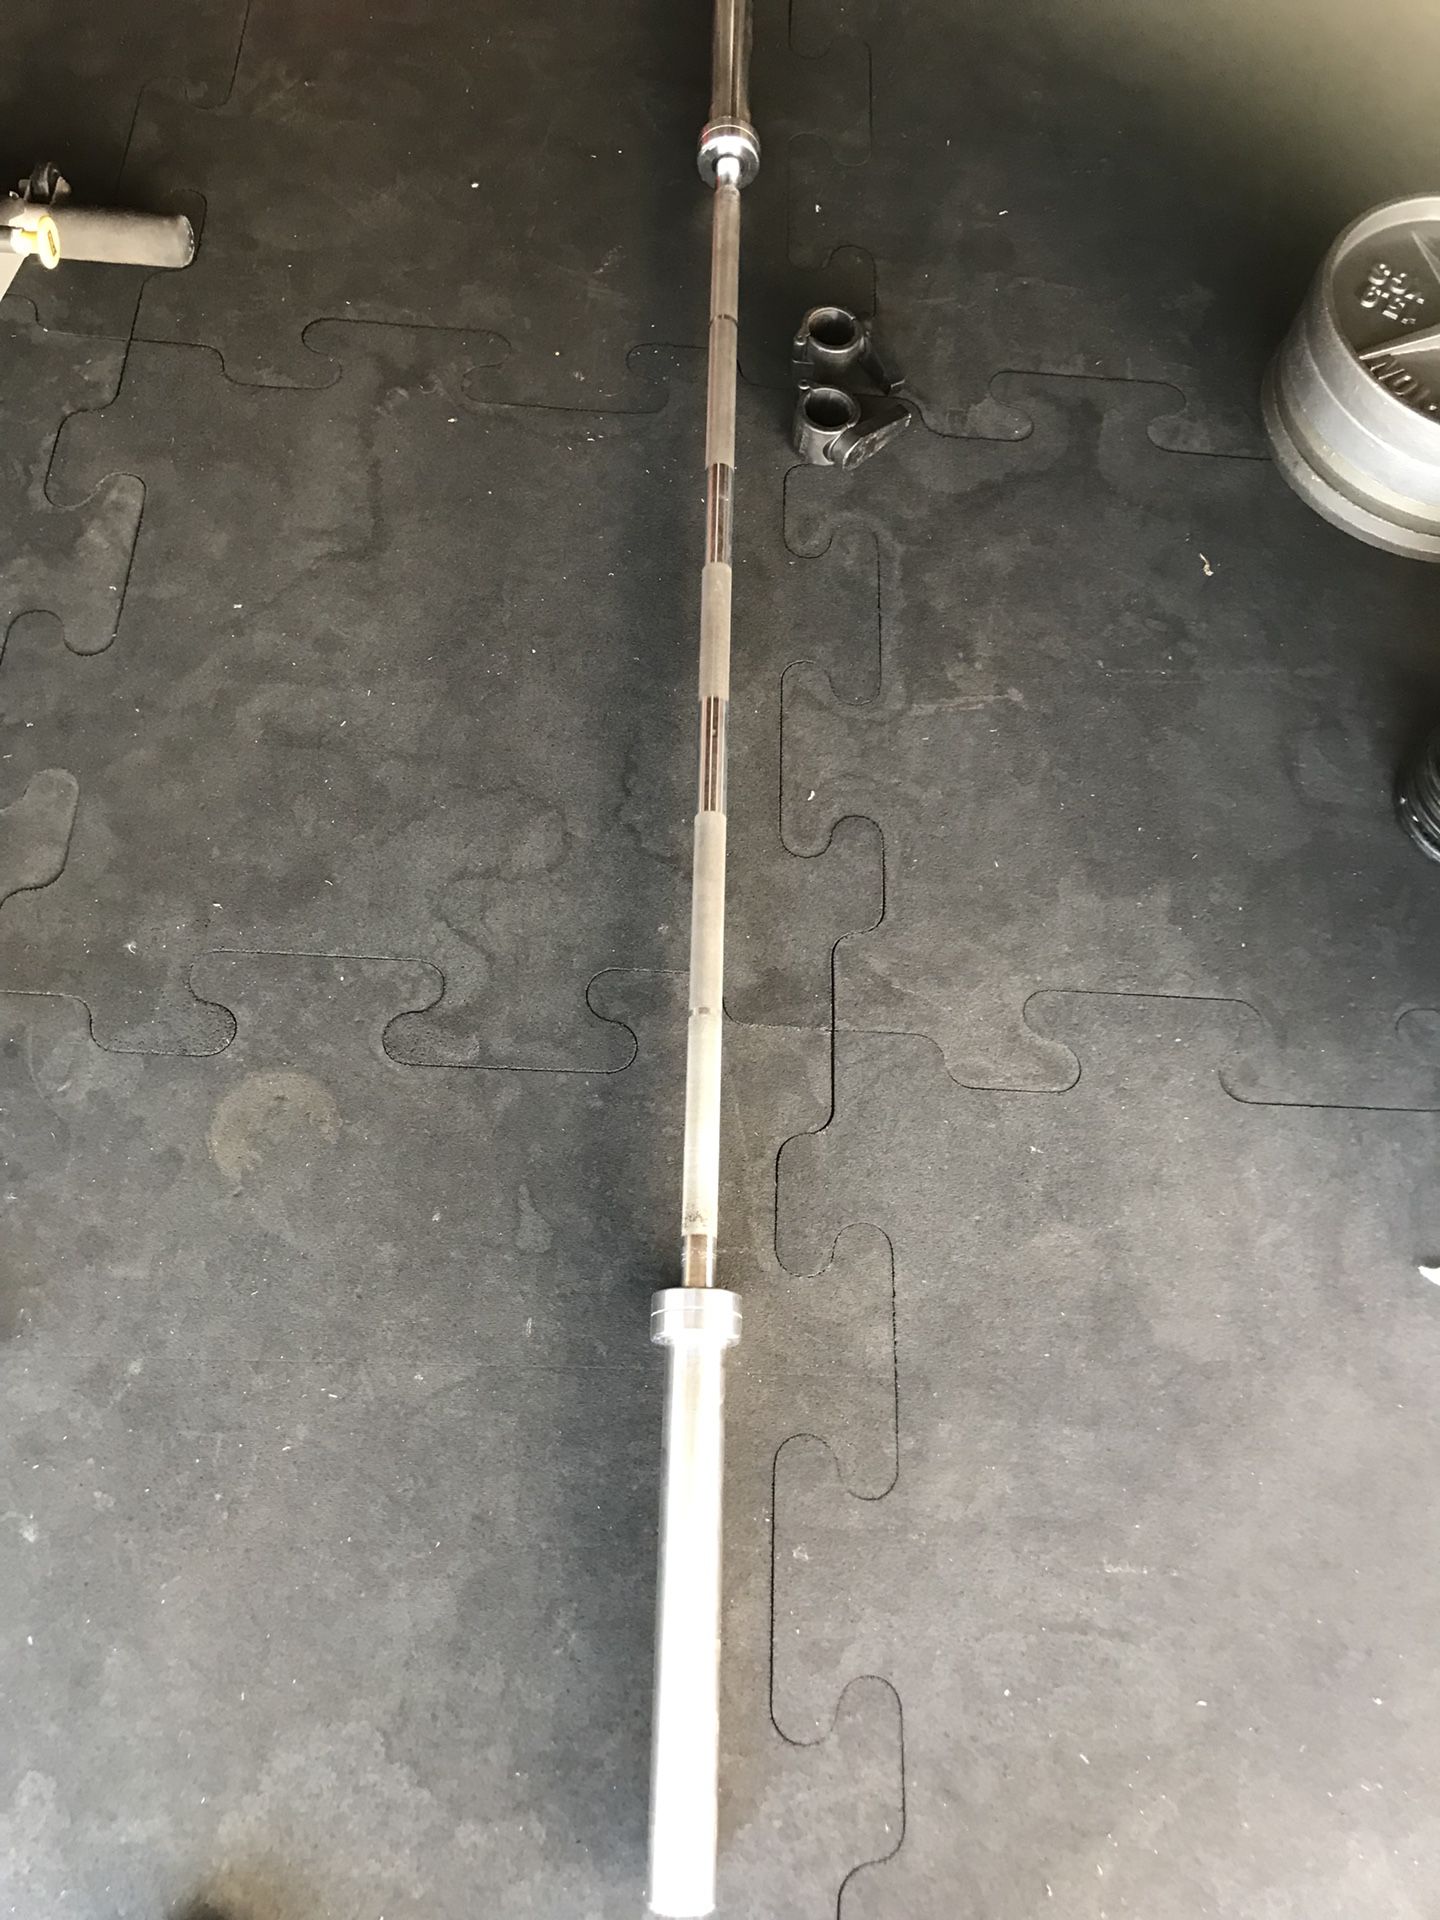 Olympic barbell for $100 Firm!!!